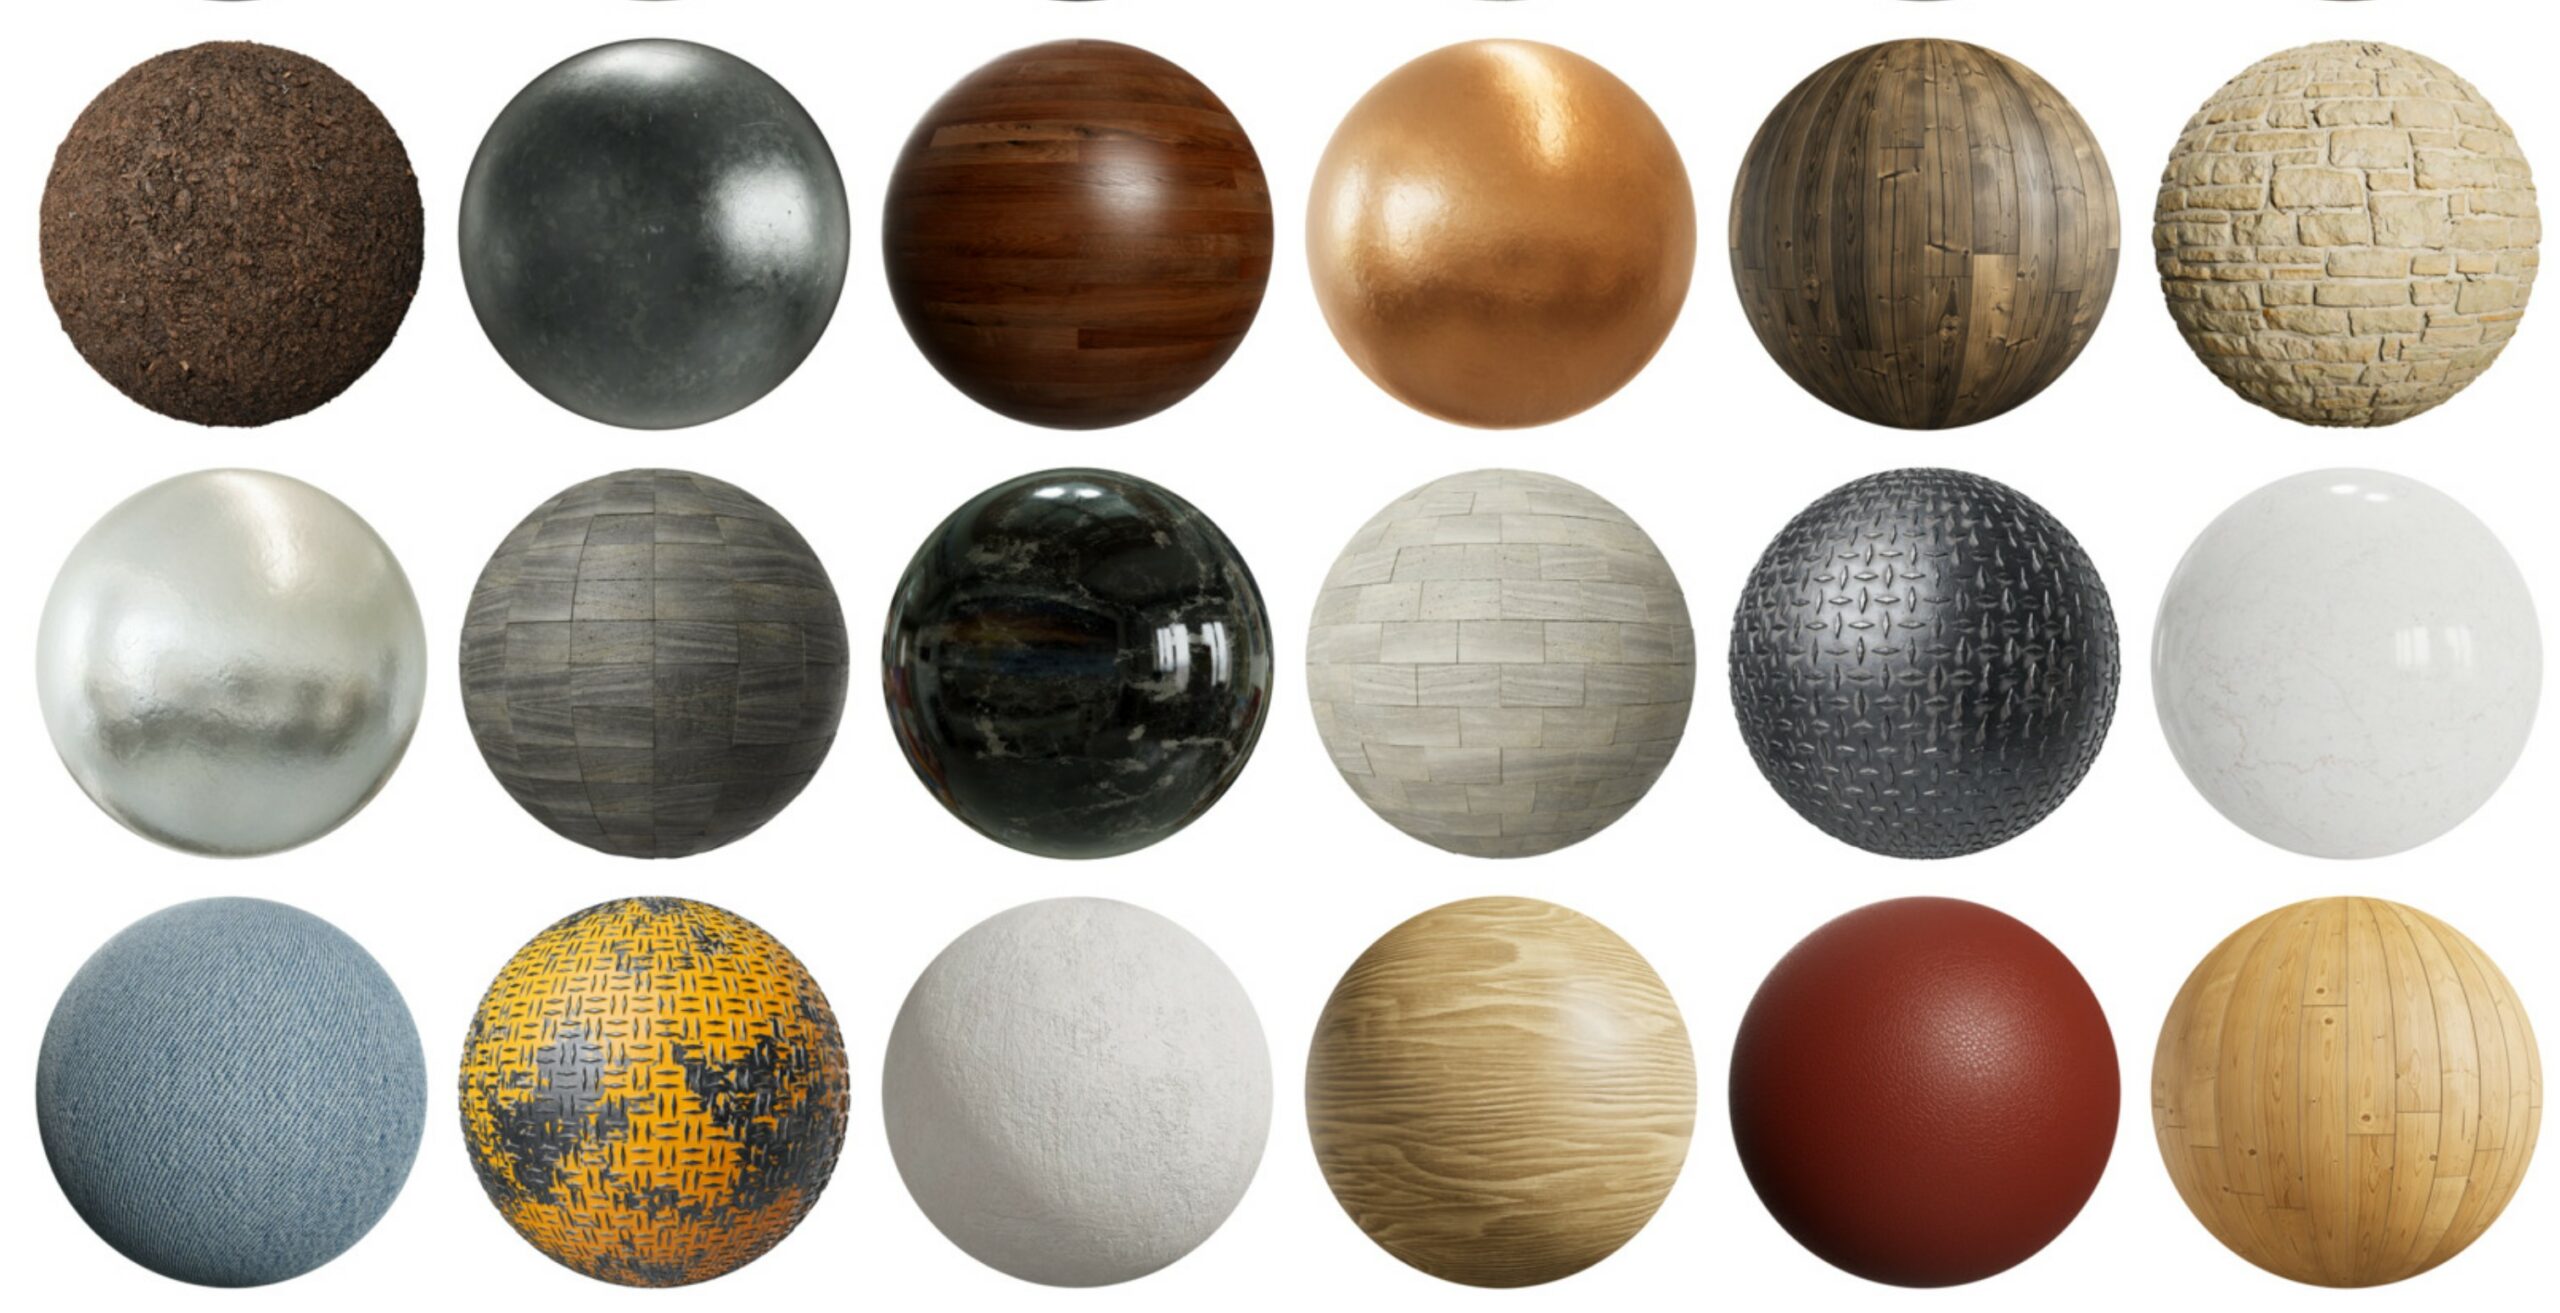 Black Latex Material on Substance 3D Community Assets